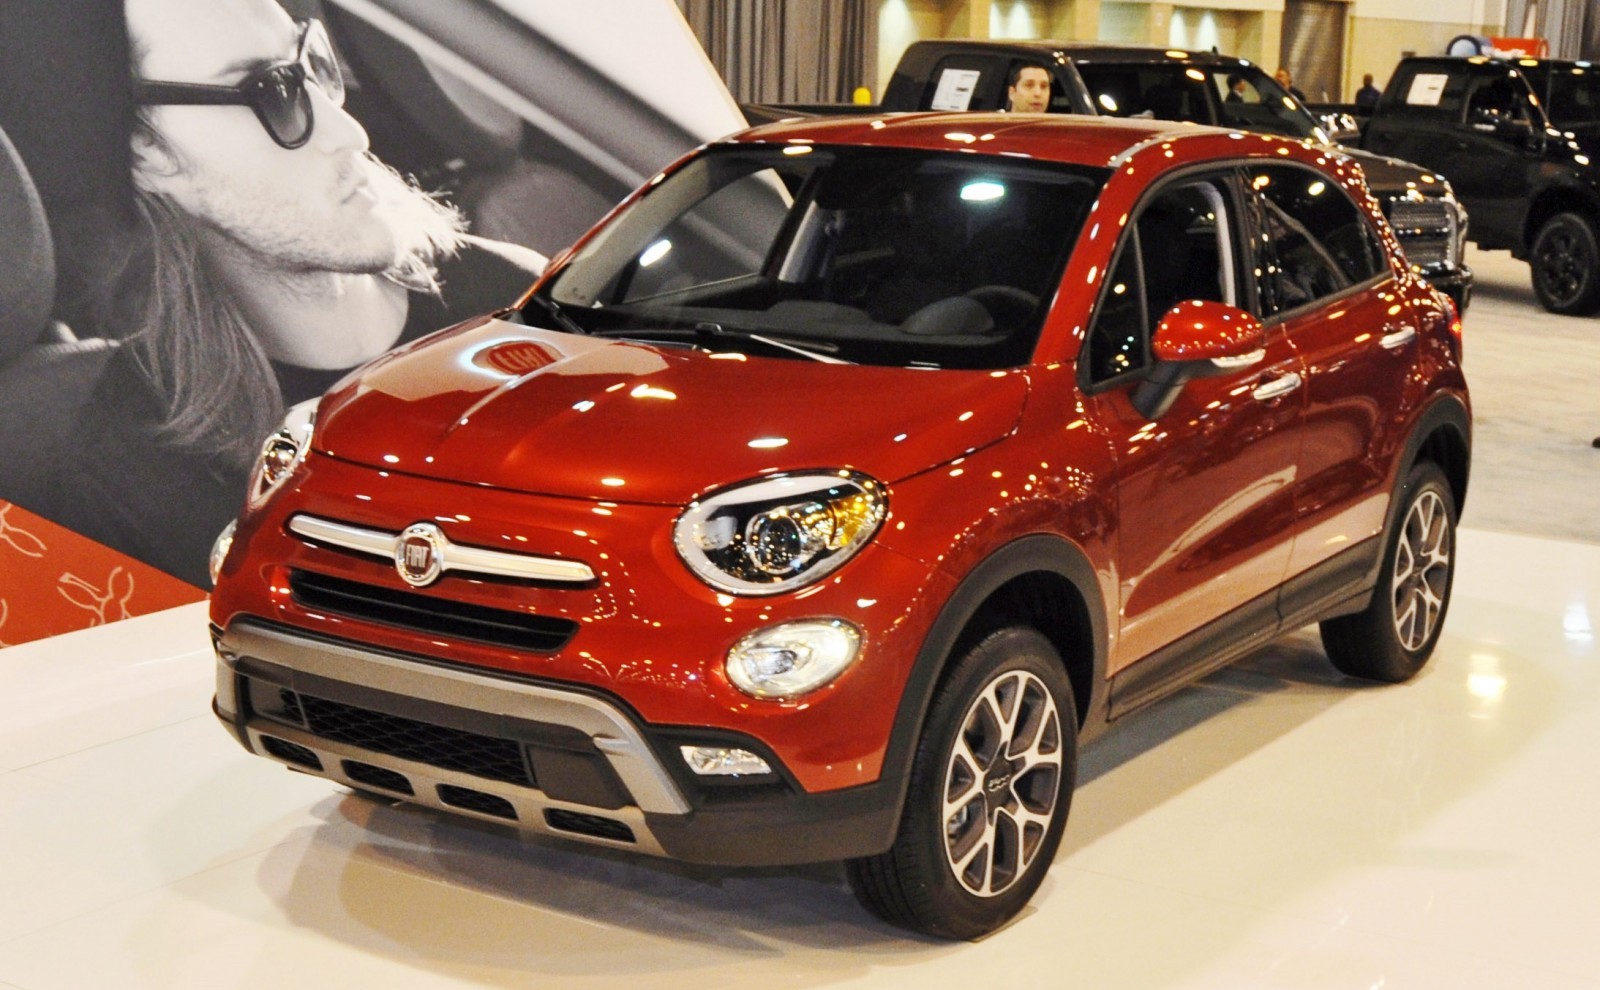 2016 Fiat 500X Pricing, Colors and Real-Life Photos!1600 x 990